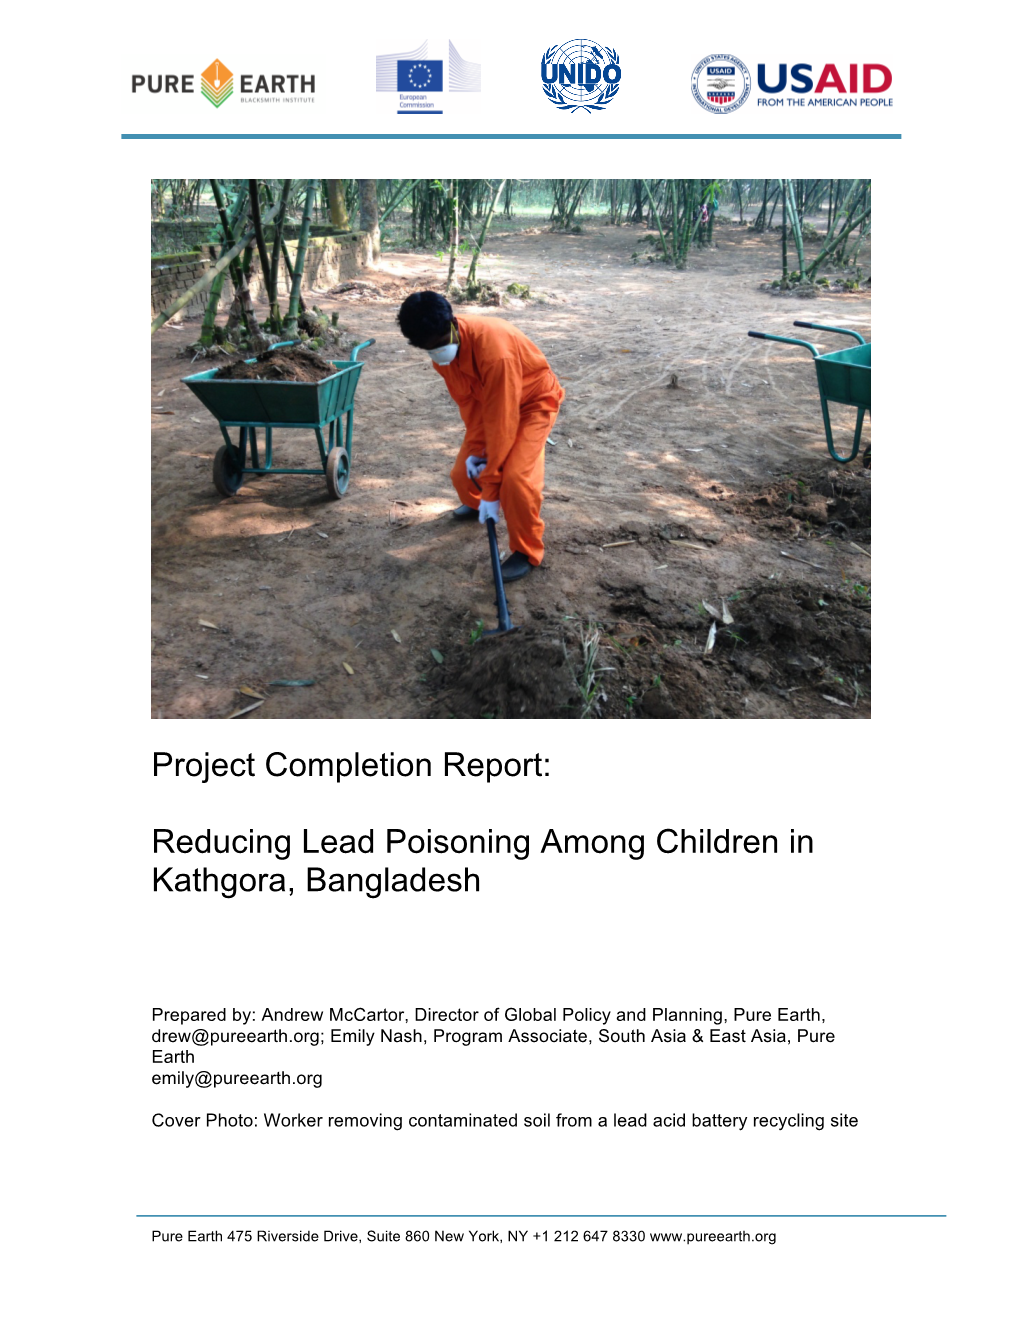 Project Completion Report: Reducing Lead Poisoning